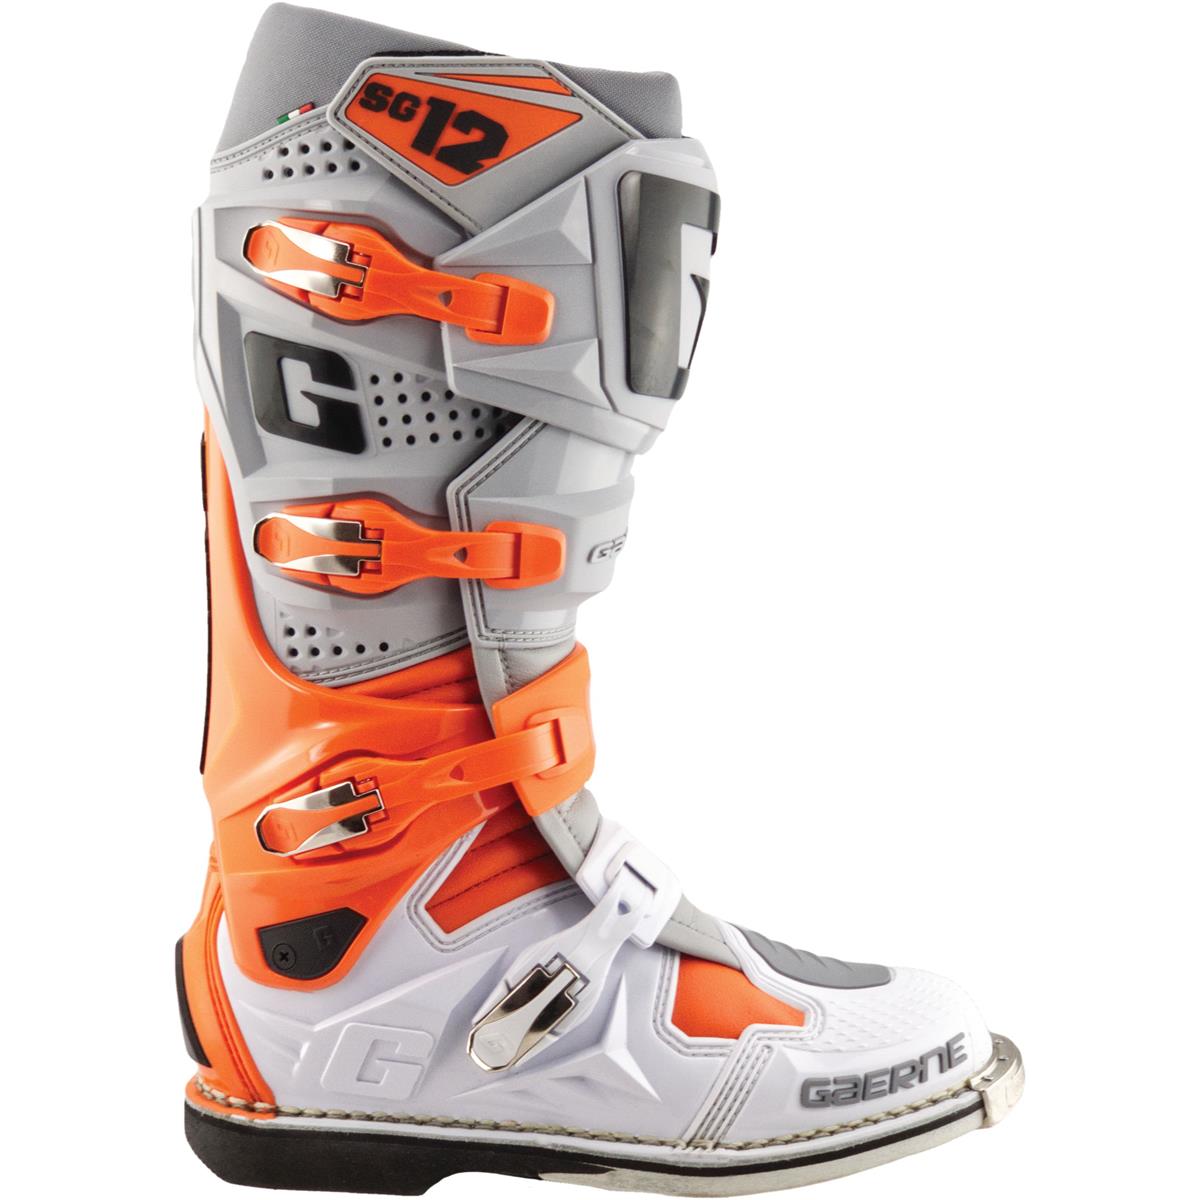 Buy > gaerne sg12 boots > in stock